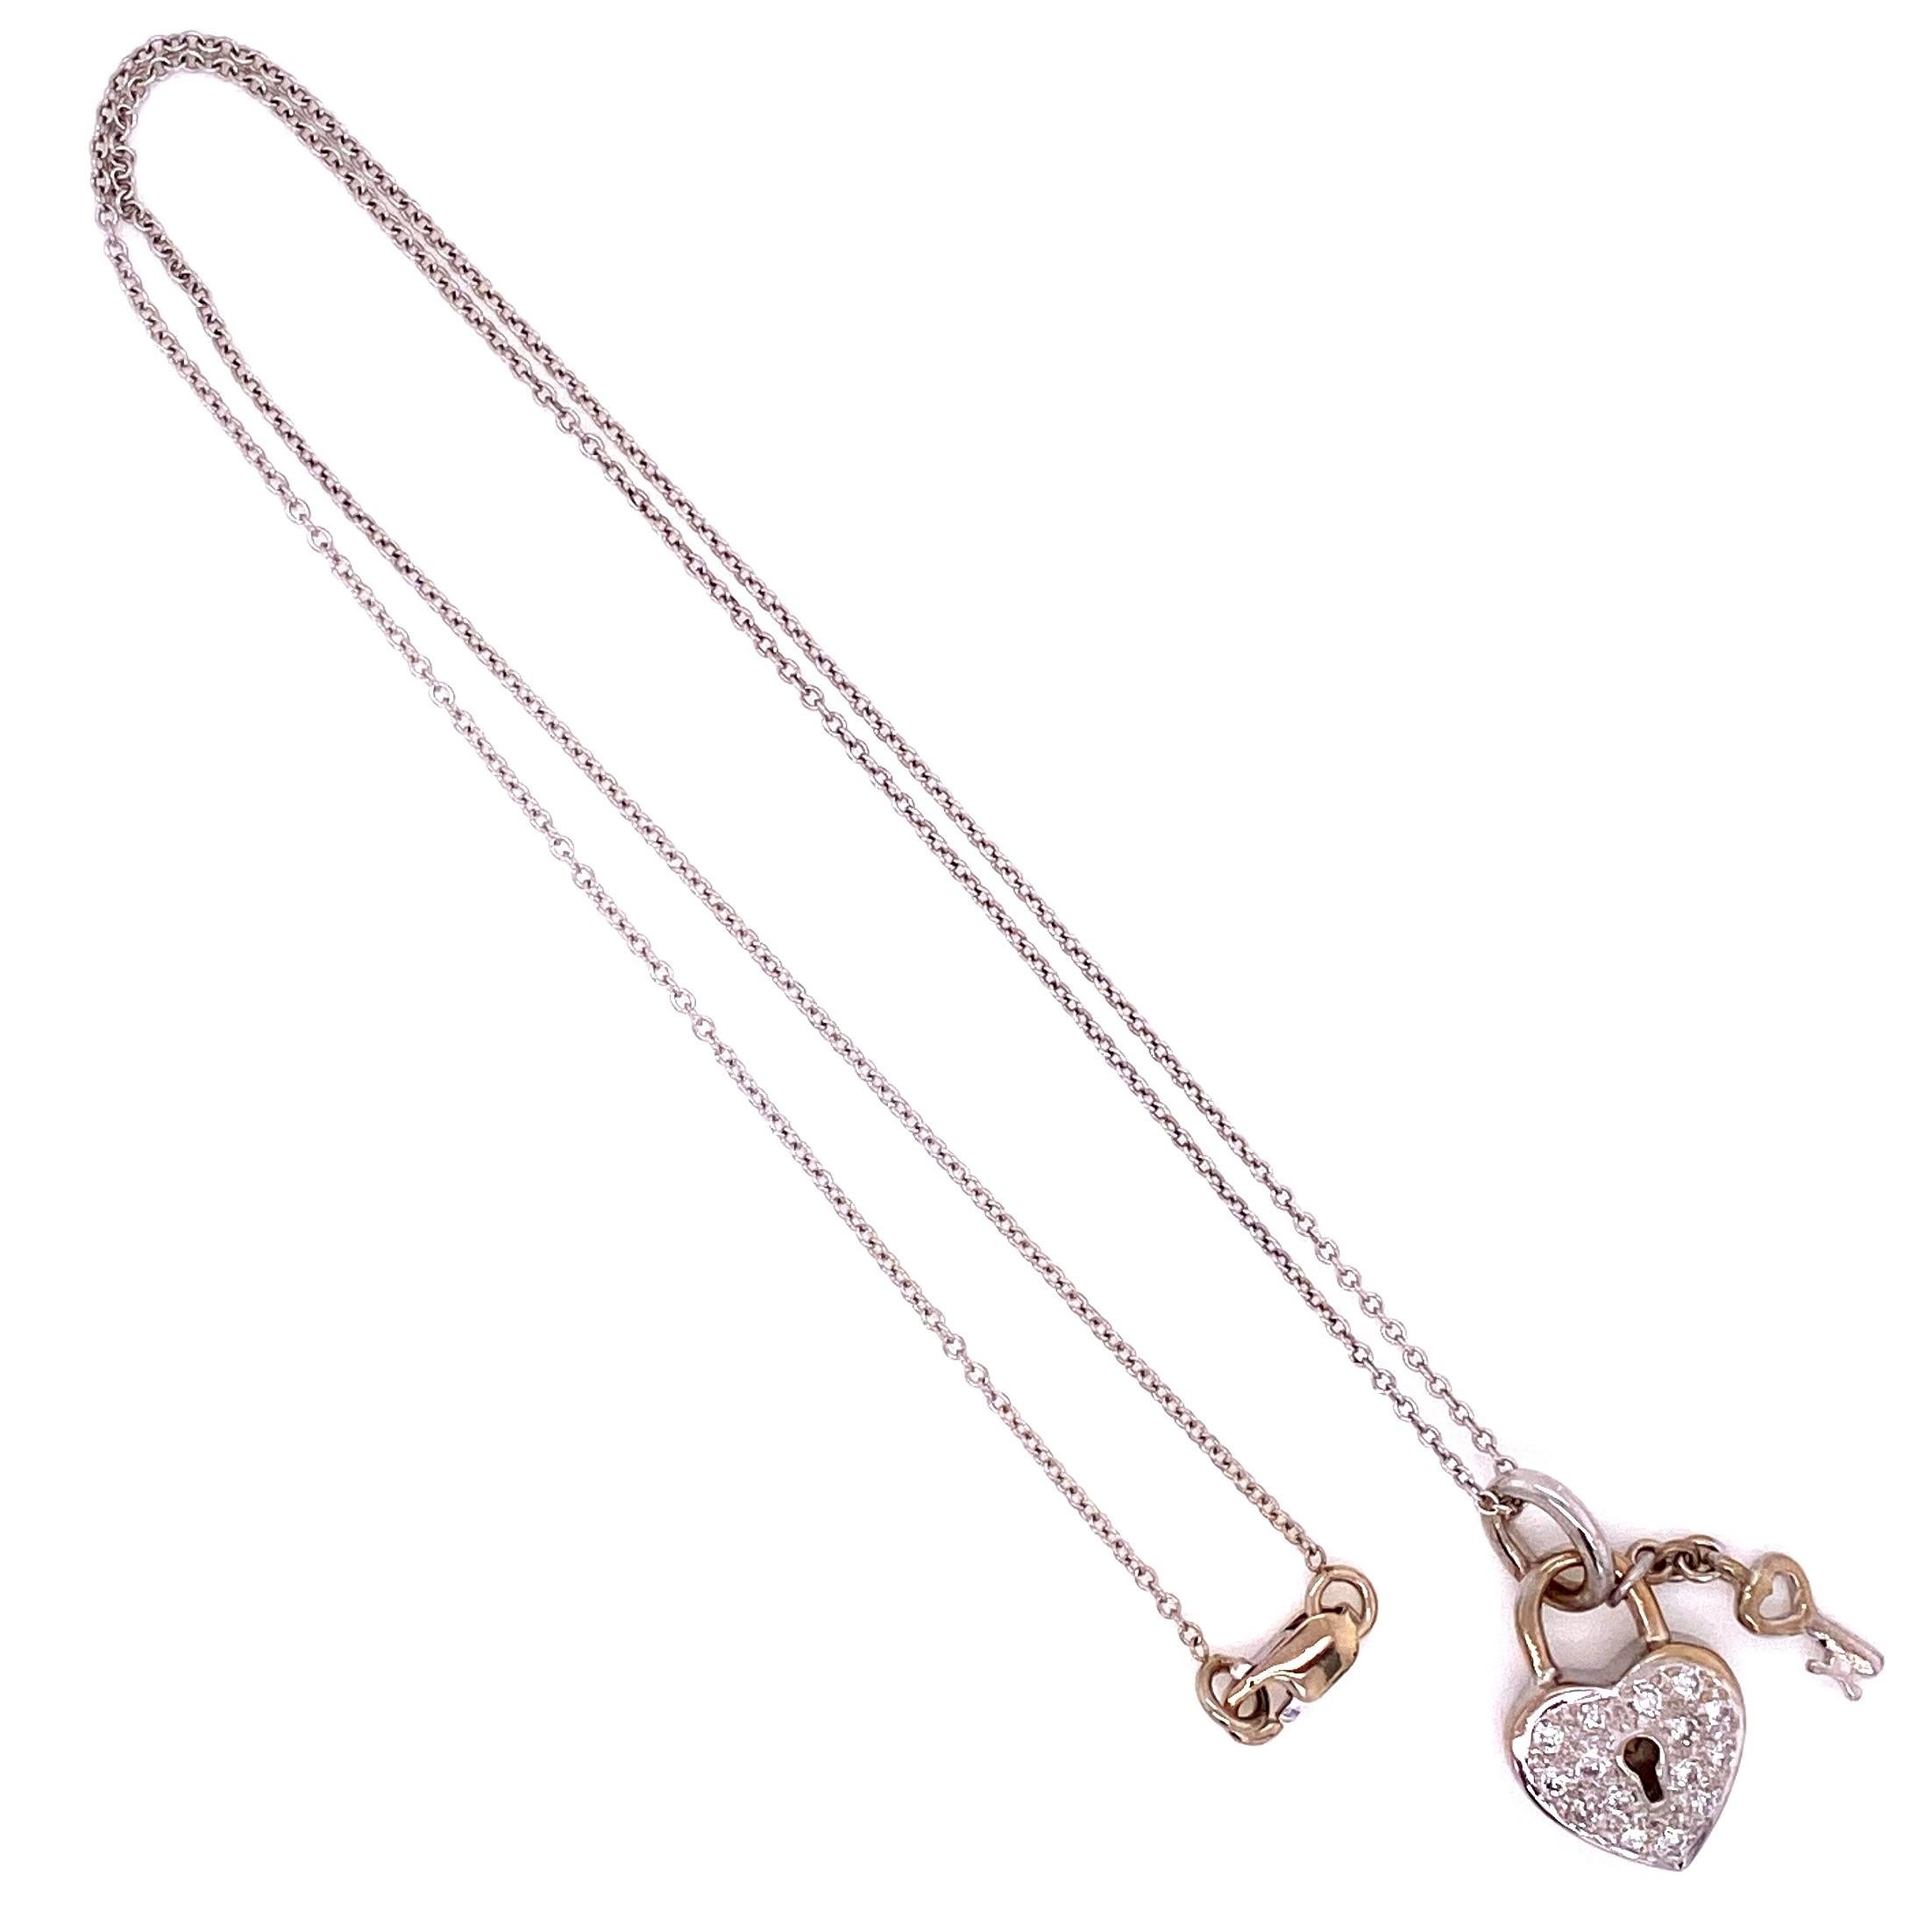 Beautiful and Finely Detailed Pave Diamond Heart Lock and dangling Key Pendant, set with round brilliant cut Diamonds, weighing approx. 0.22 Carat total weight. Hand crafted in 18 Karat white Gold. Chain measures approx. 16 inches. This pendant